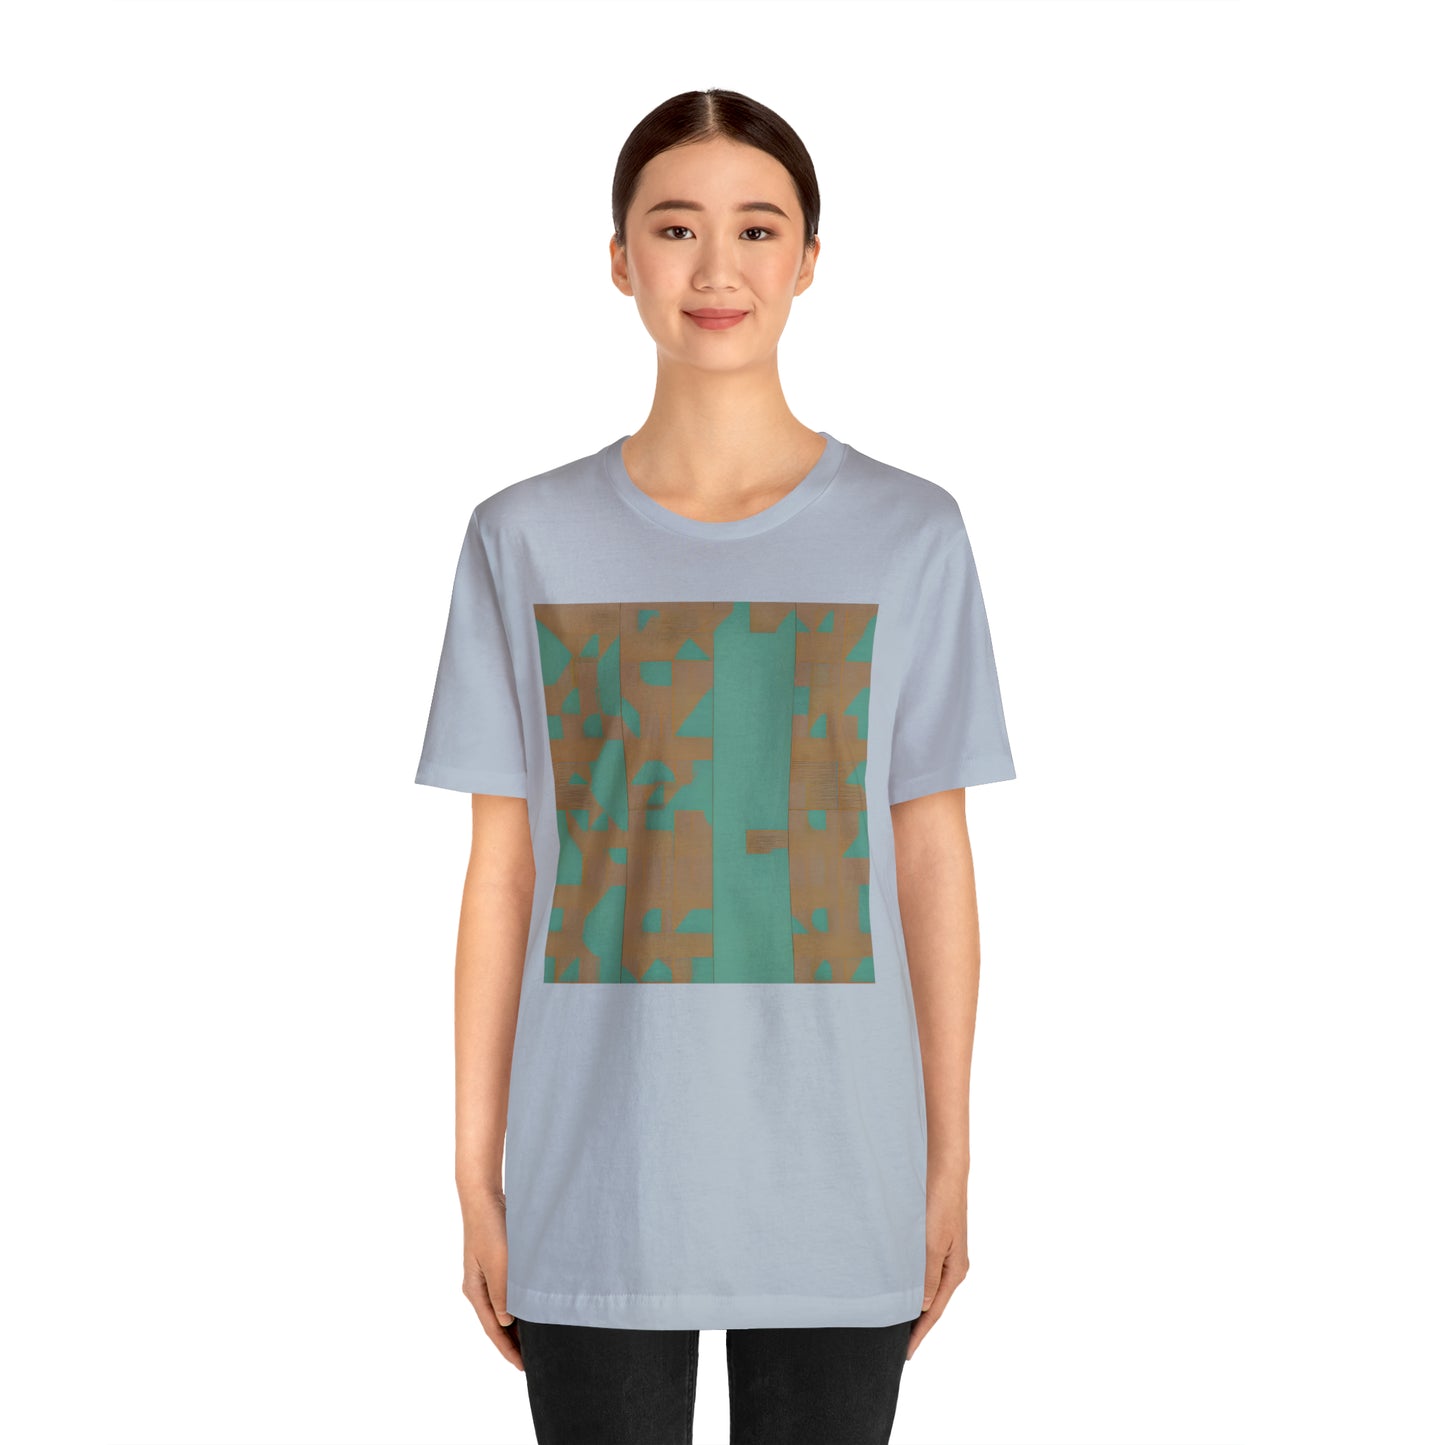 ABSTRACT SHAPES 103 - Unisex Jersey Short Sleeve Tee